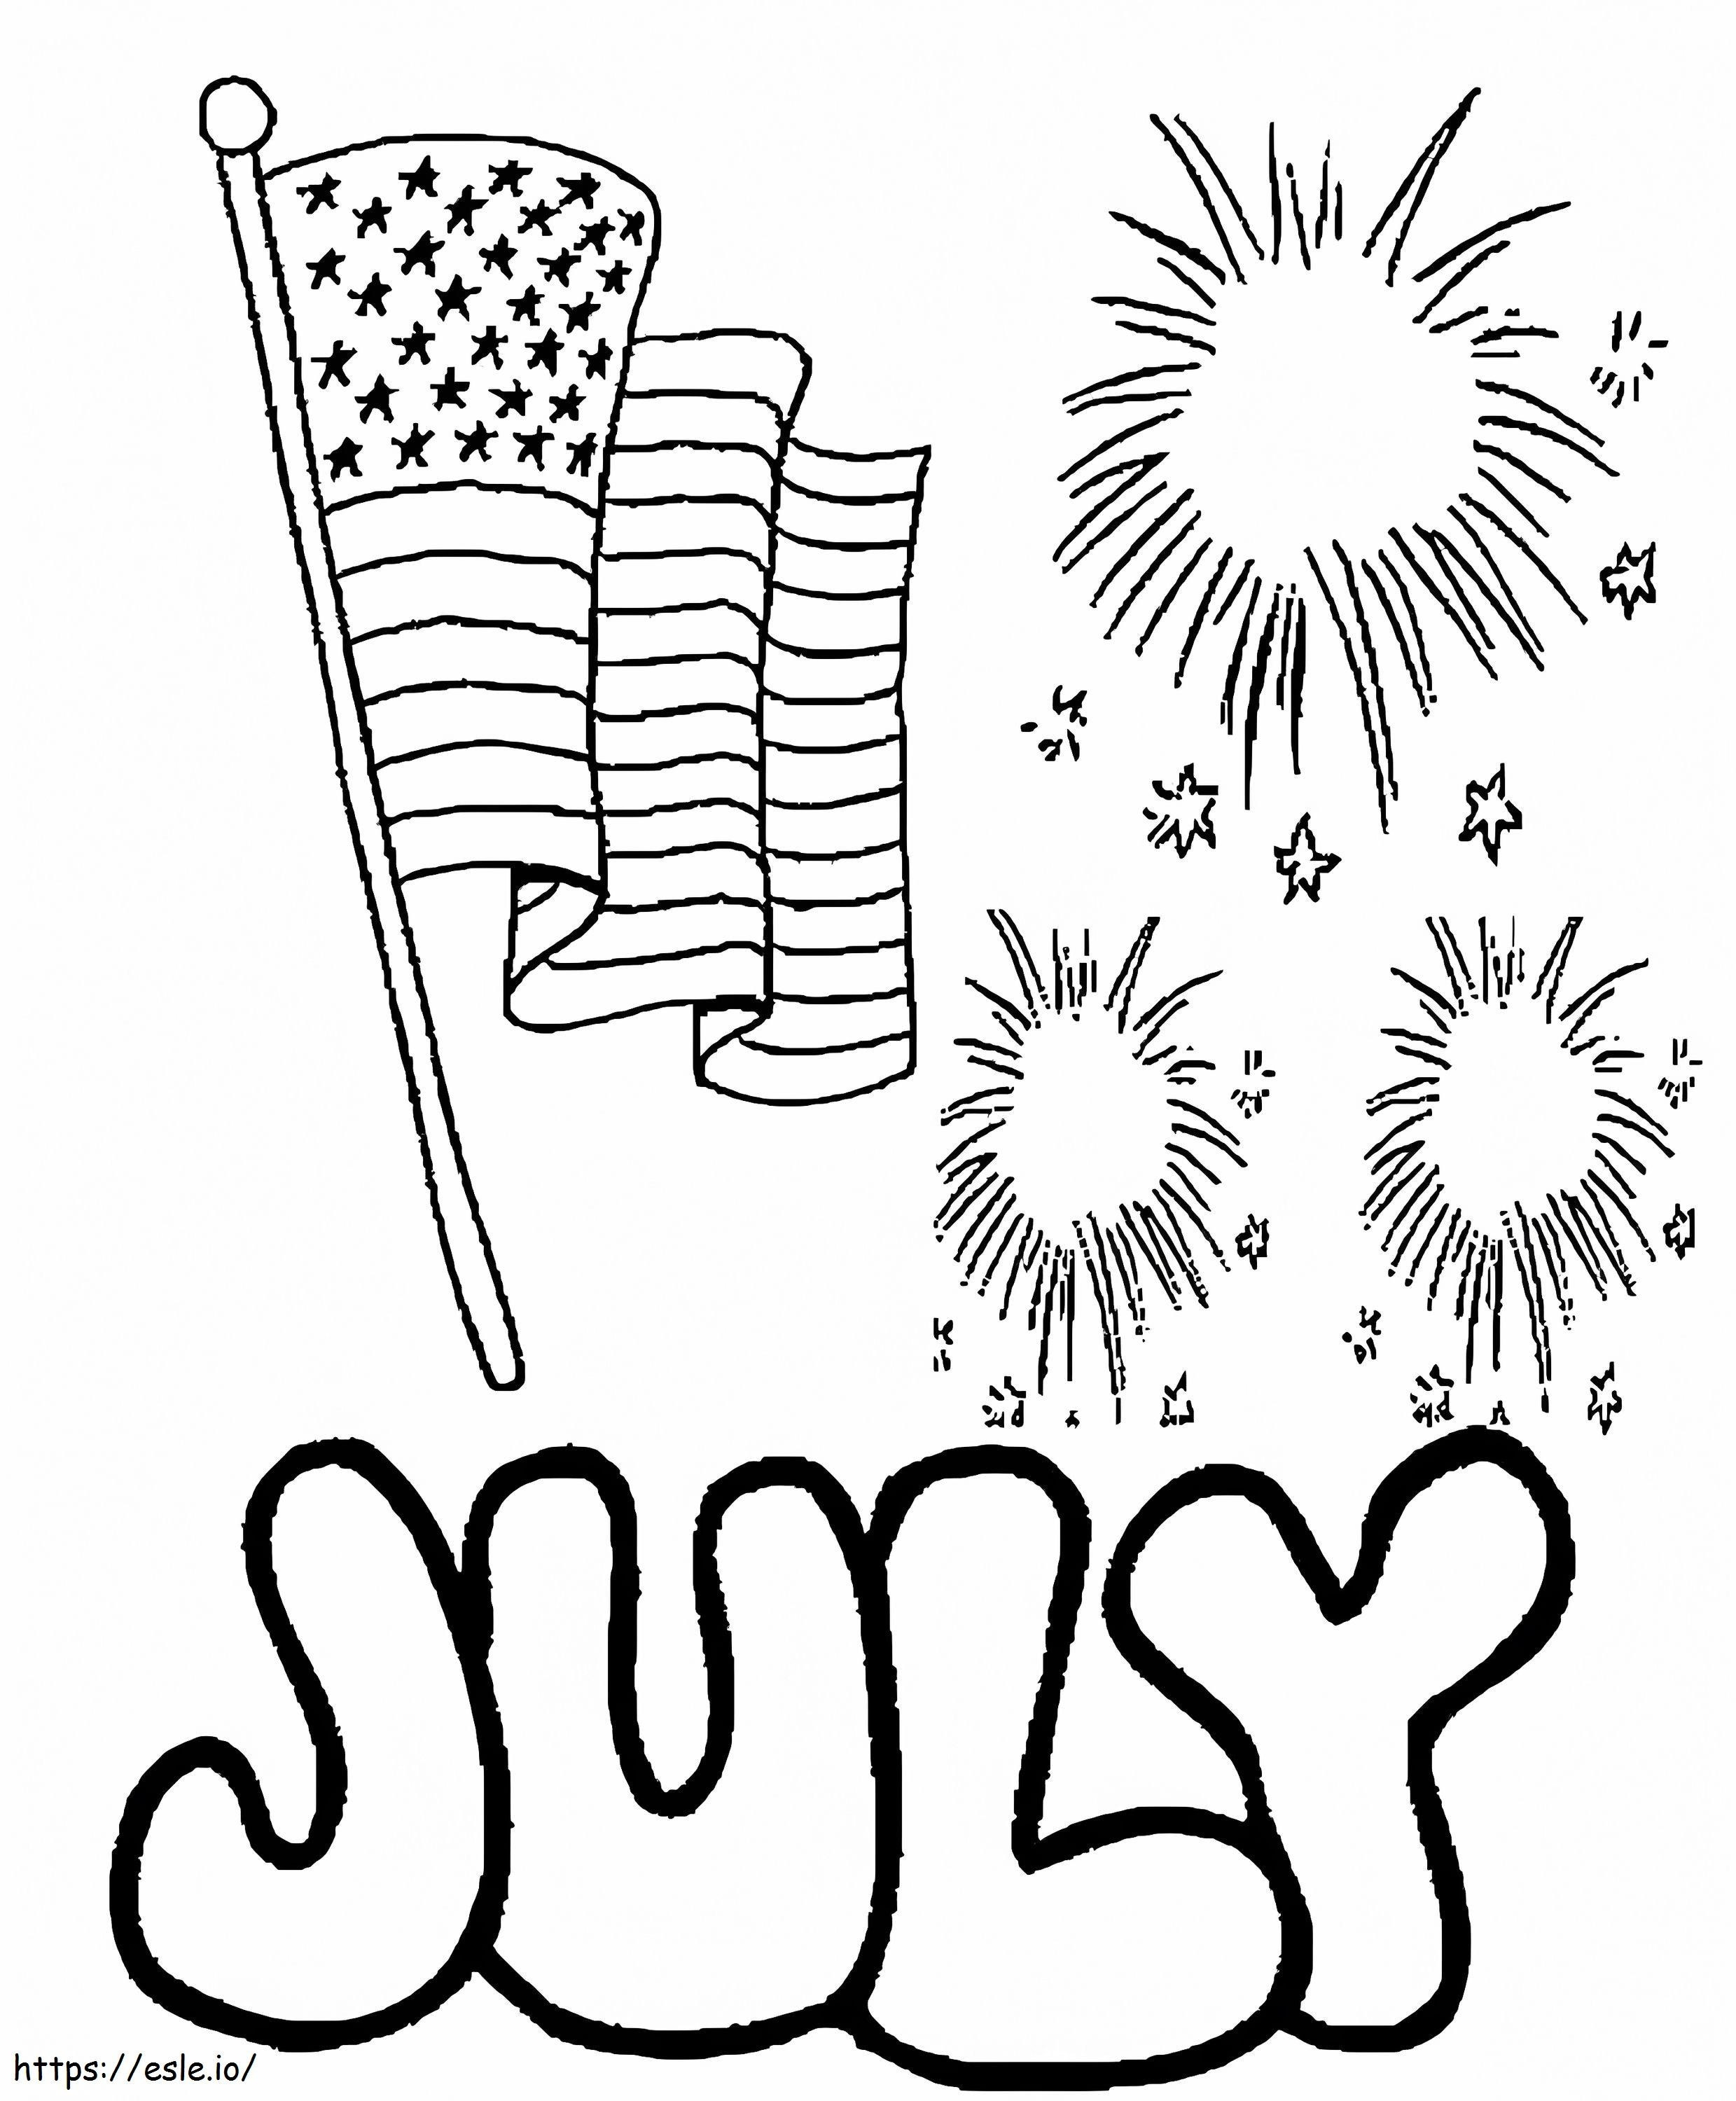 July 5 coloring page